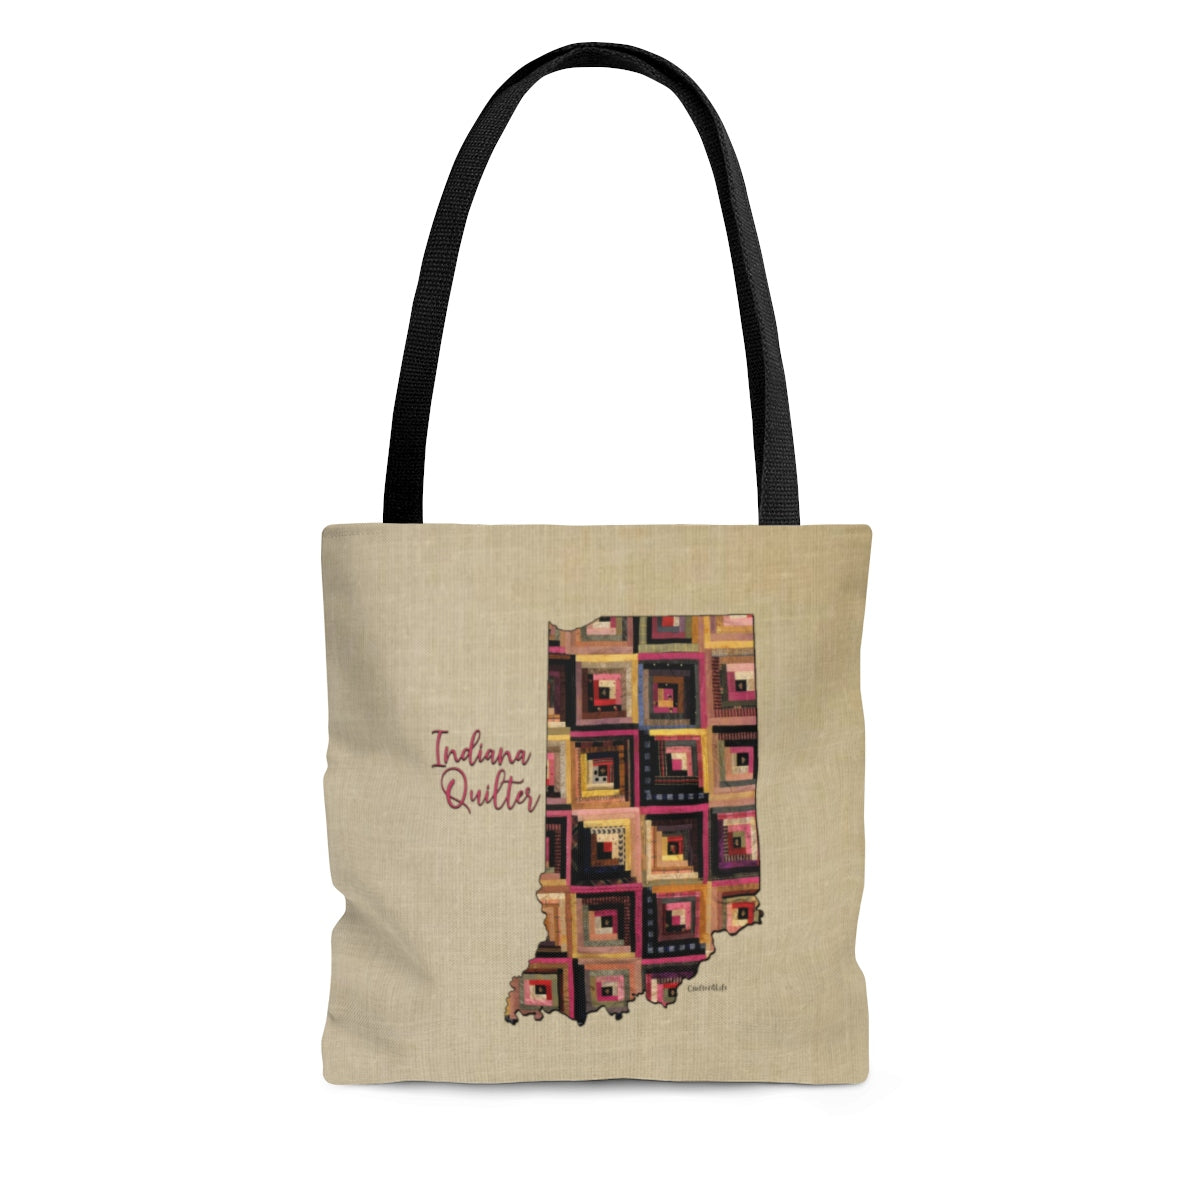 Indiana Quilter Cloth Tote Bag